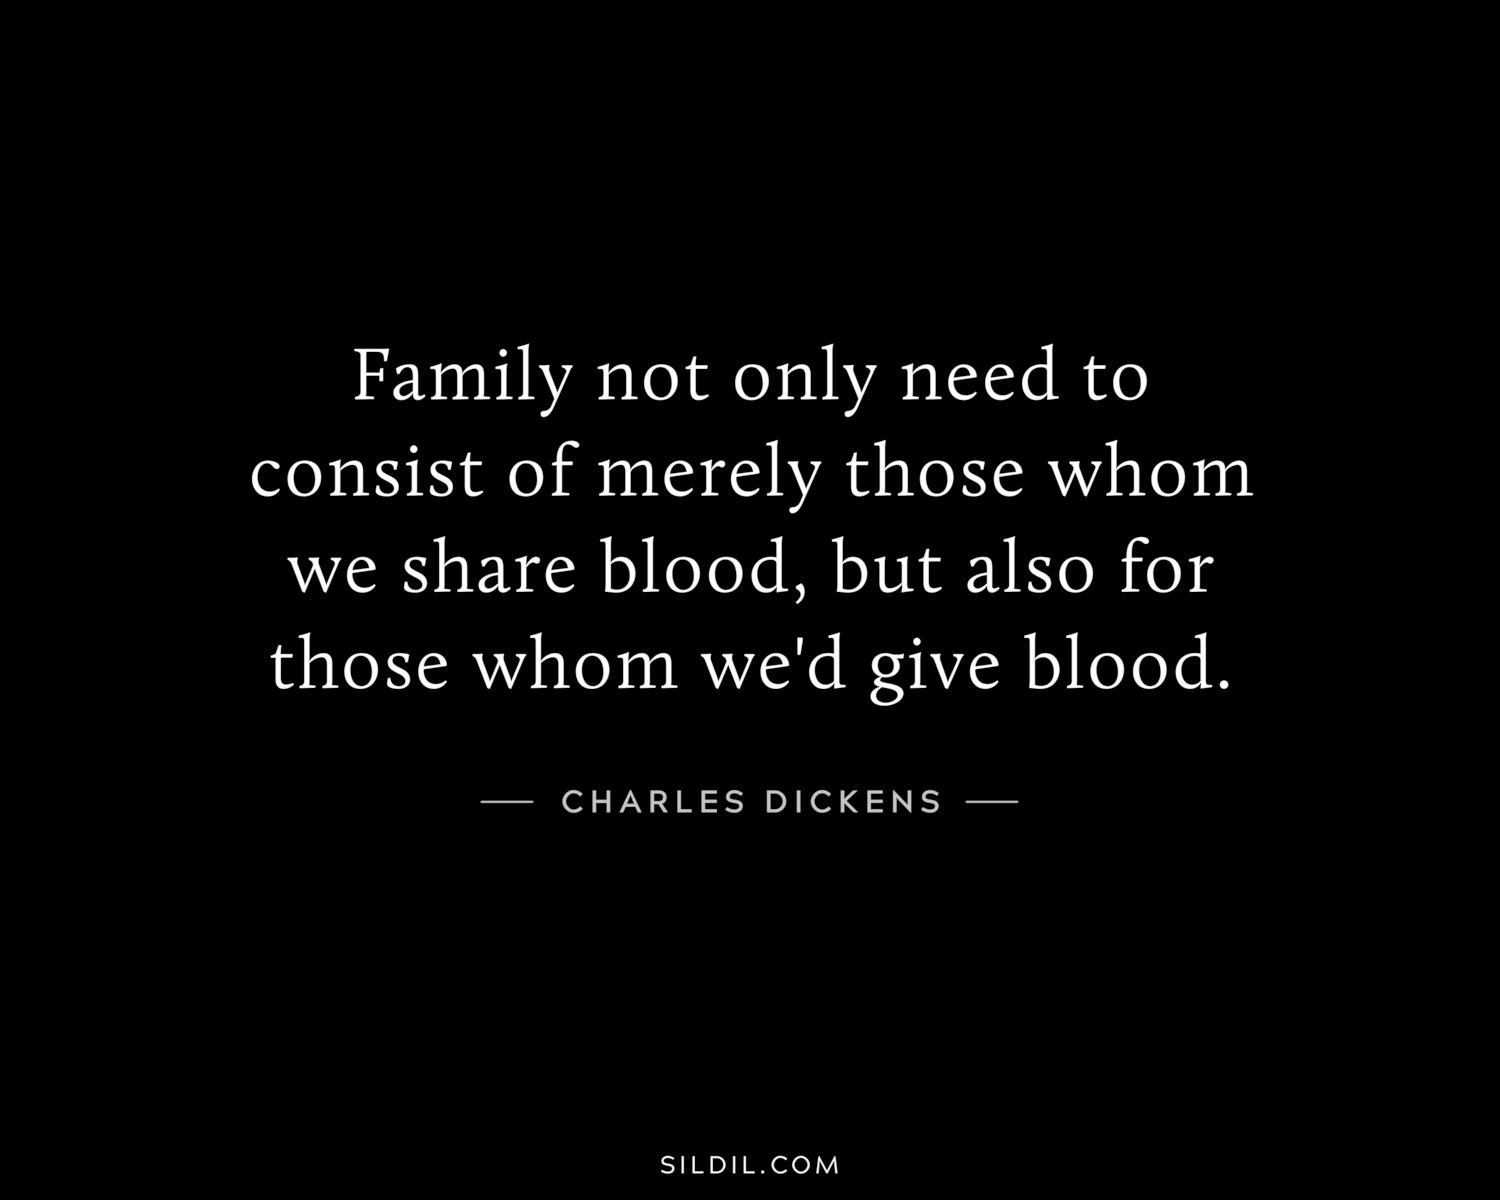 Family not only need to consist of merely those whom we share blood, but also for those whom we'd give blood.